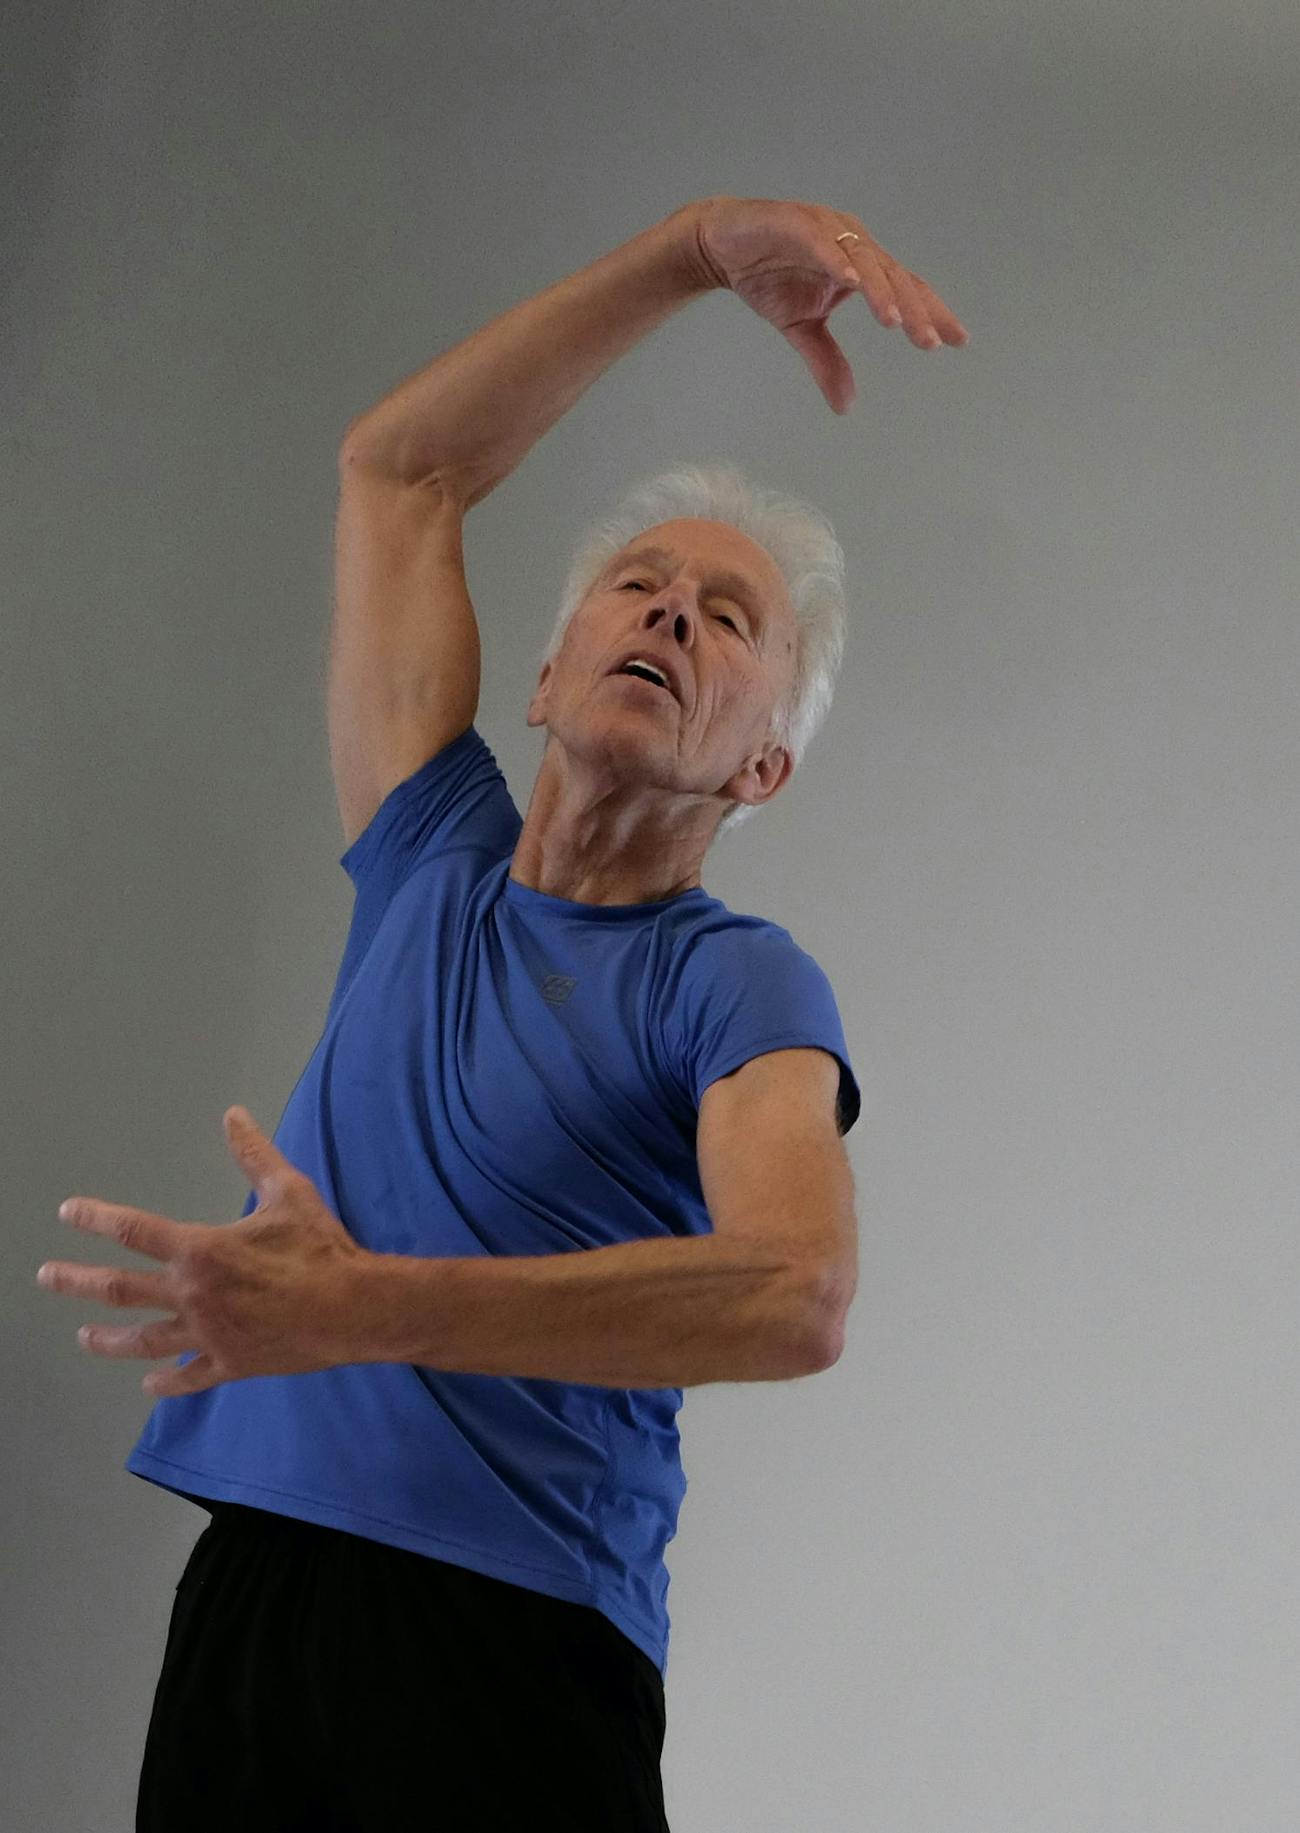 Image of a person dancing, one hand above their head and one hand in front of them. The person has gray hair. and closes his eyes, is wearing black pants and a blue top.